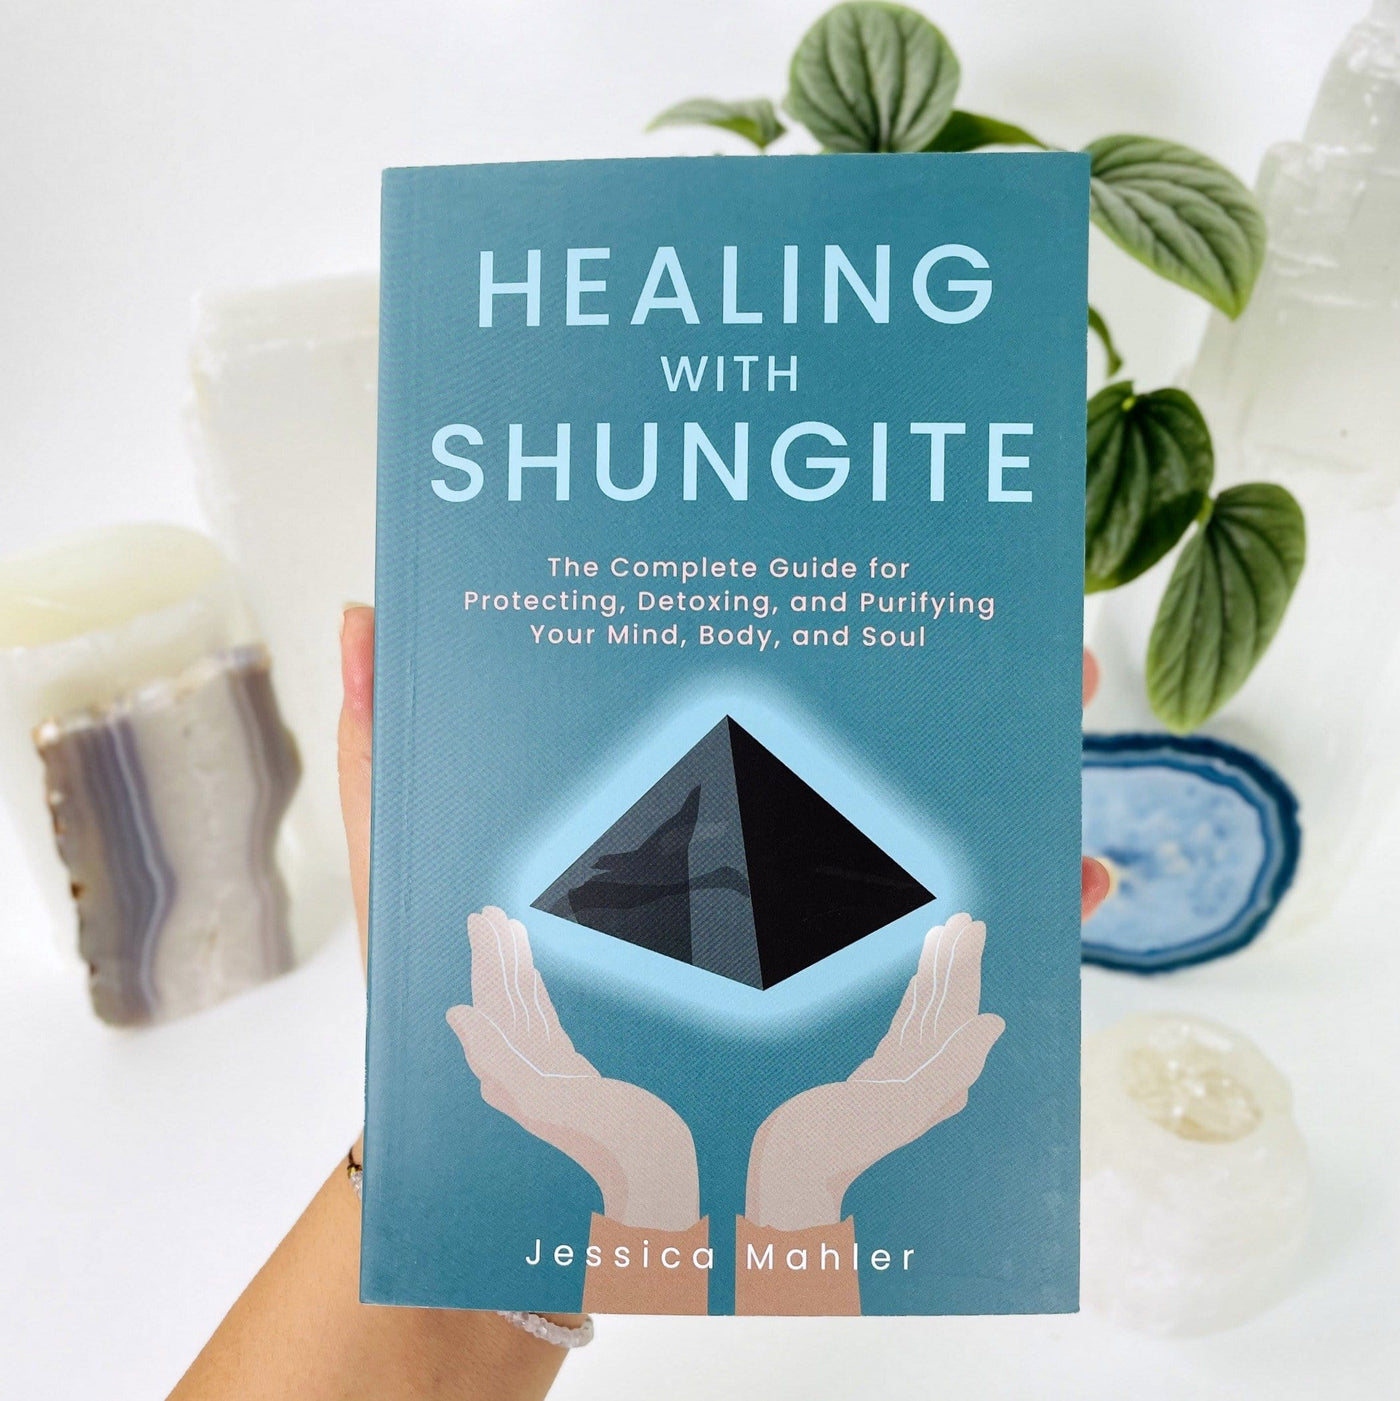 the book healing with shungite being held on a hand to show size and showing the front cover